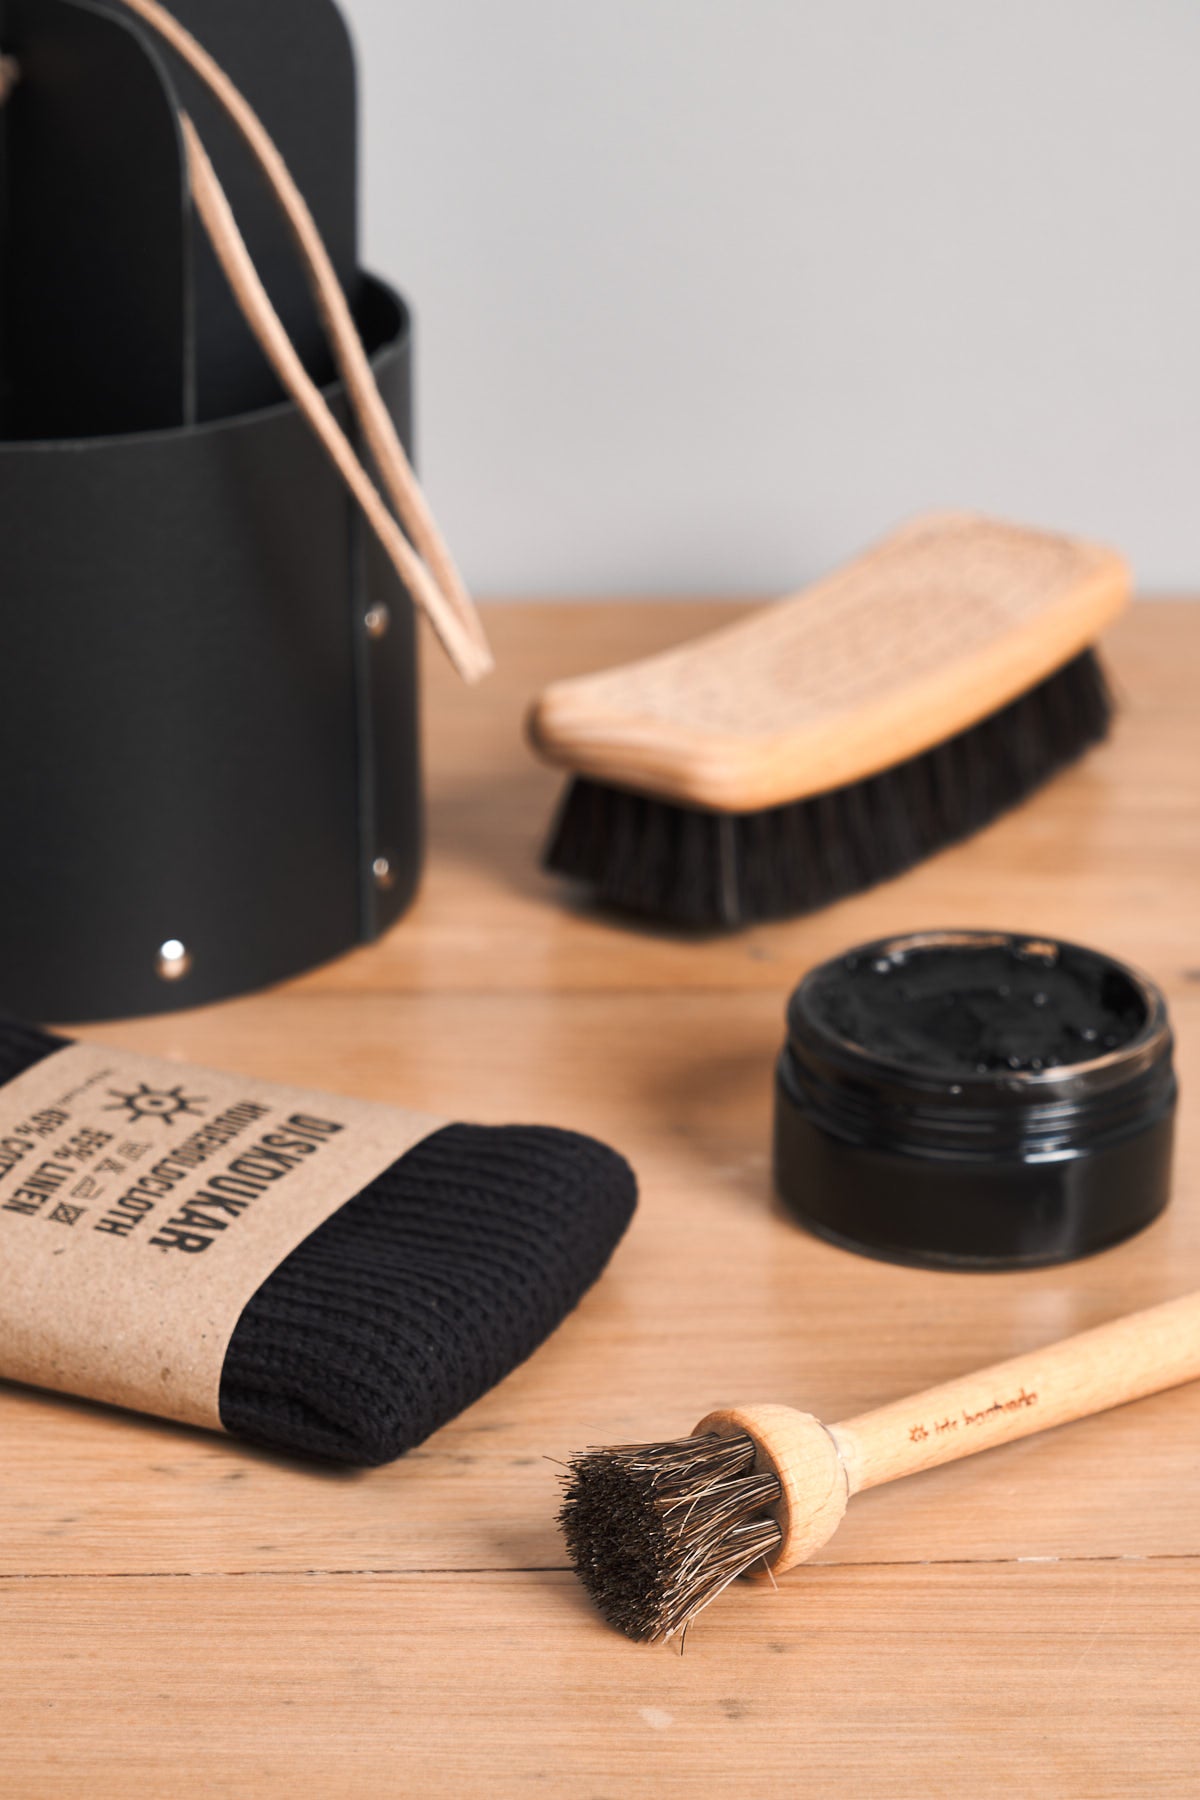 An Iris Hantverk Shoe Care Kit with a brush, brush, and other items.